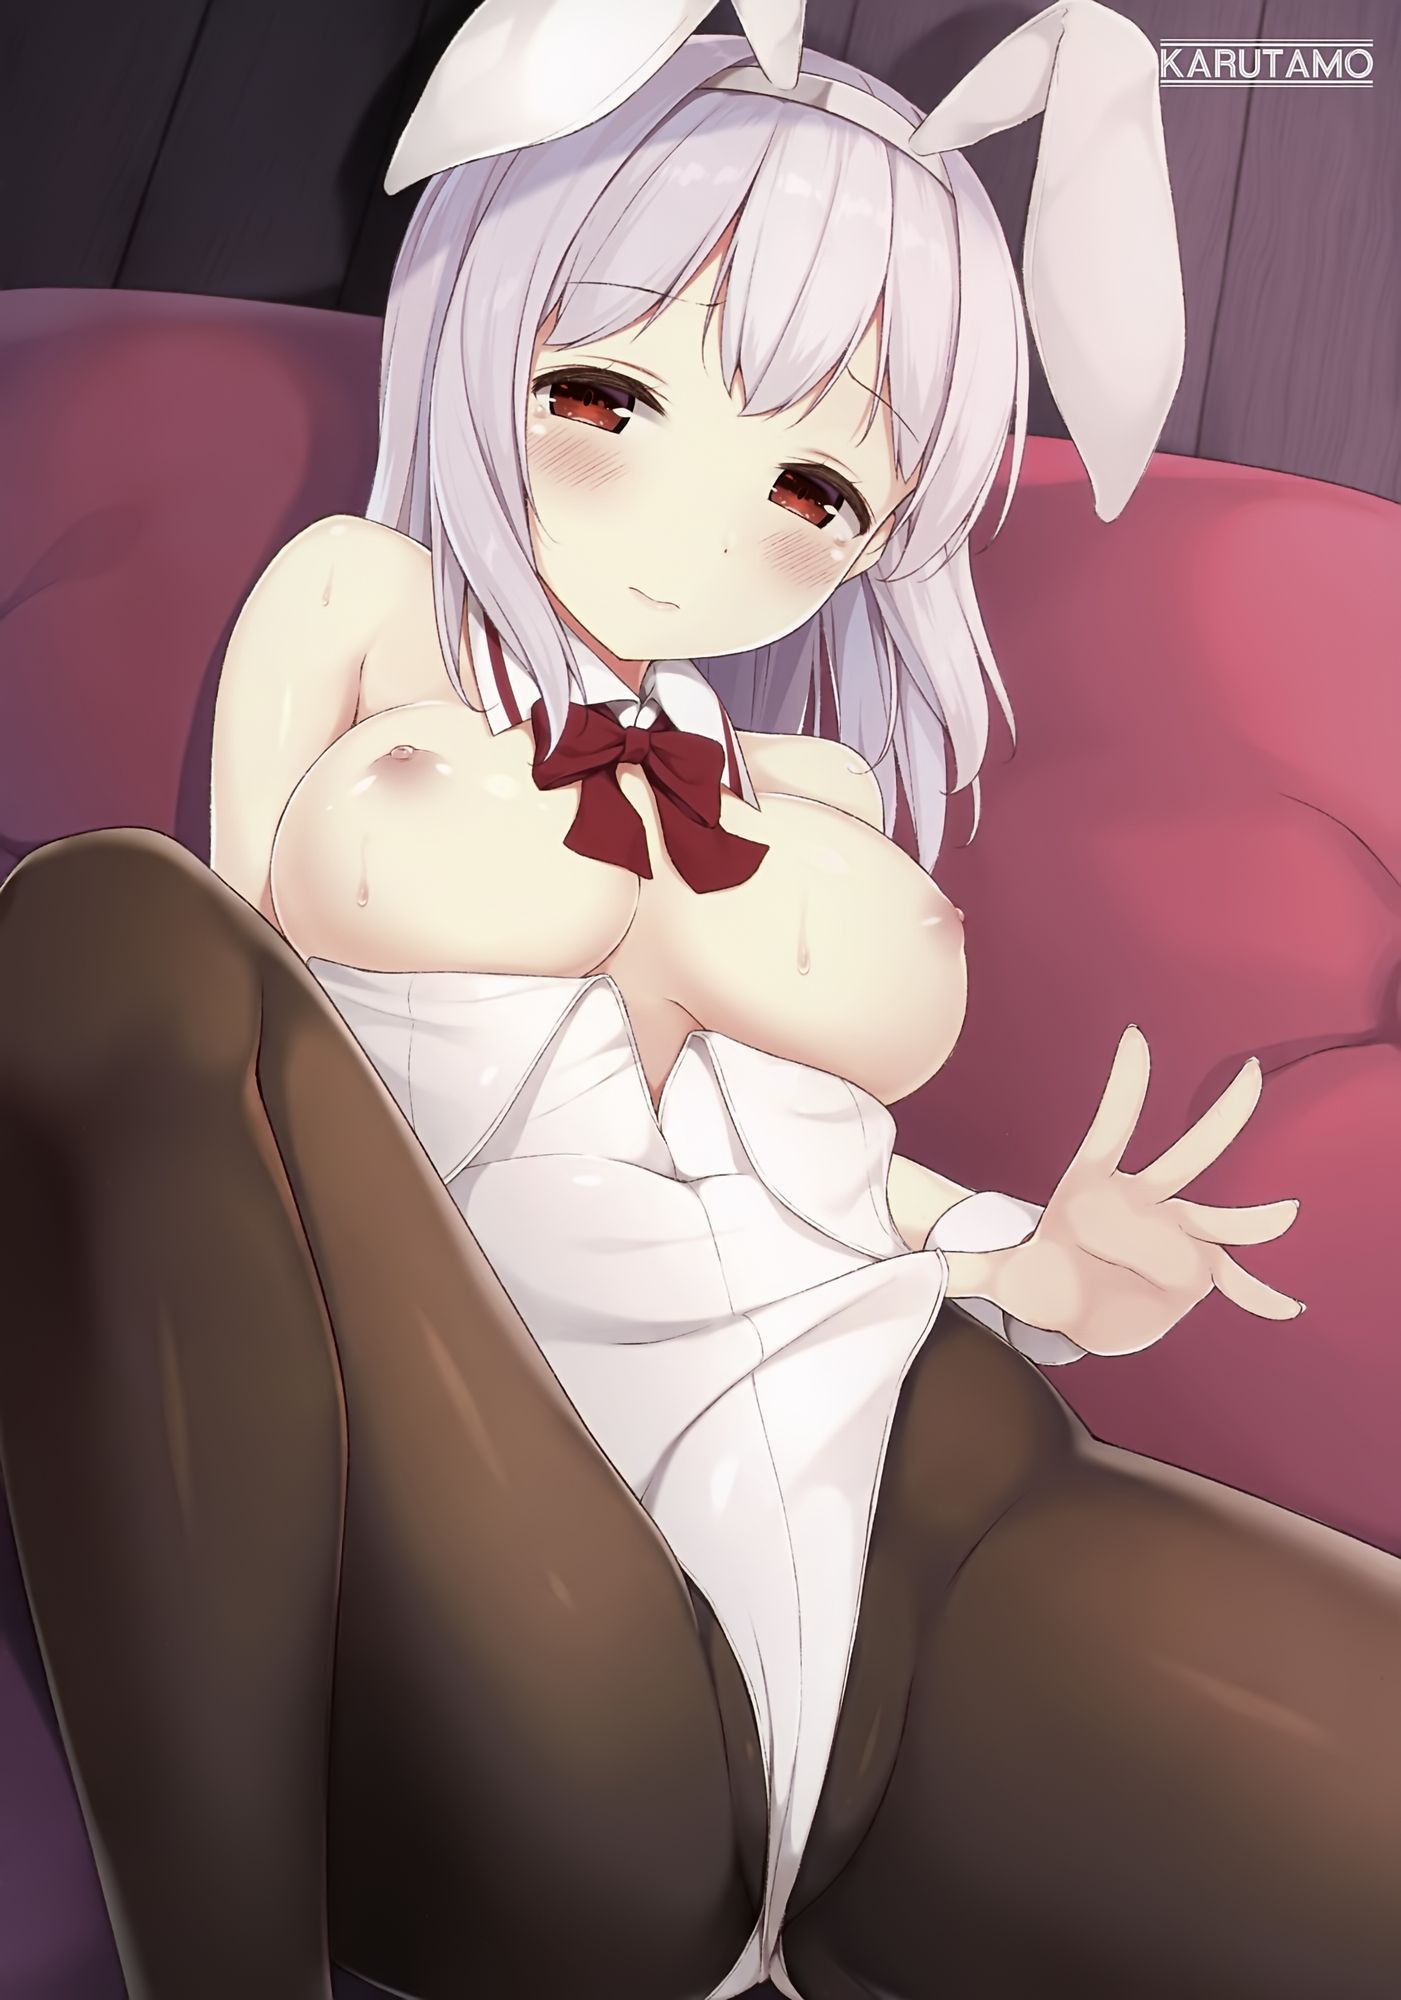 [2nd] Sexy Bunny Girl Pretty Second Erotic Image Part 38 [Bunny Girl] 13